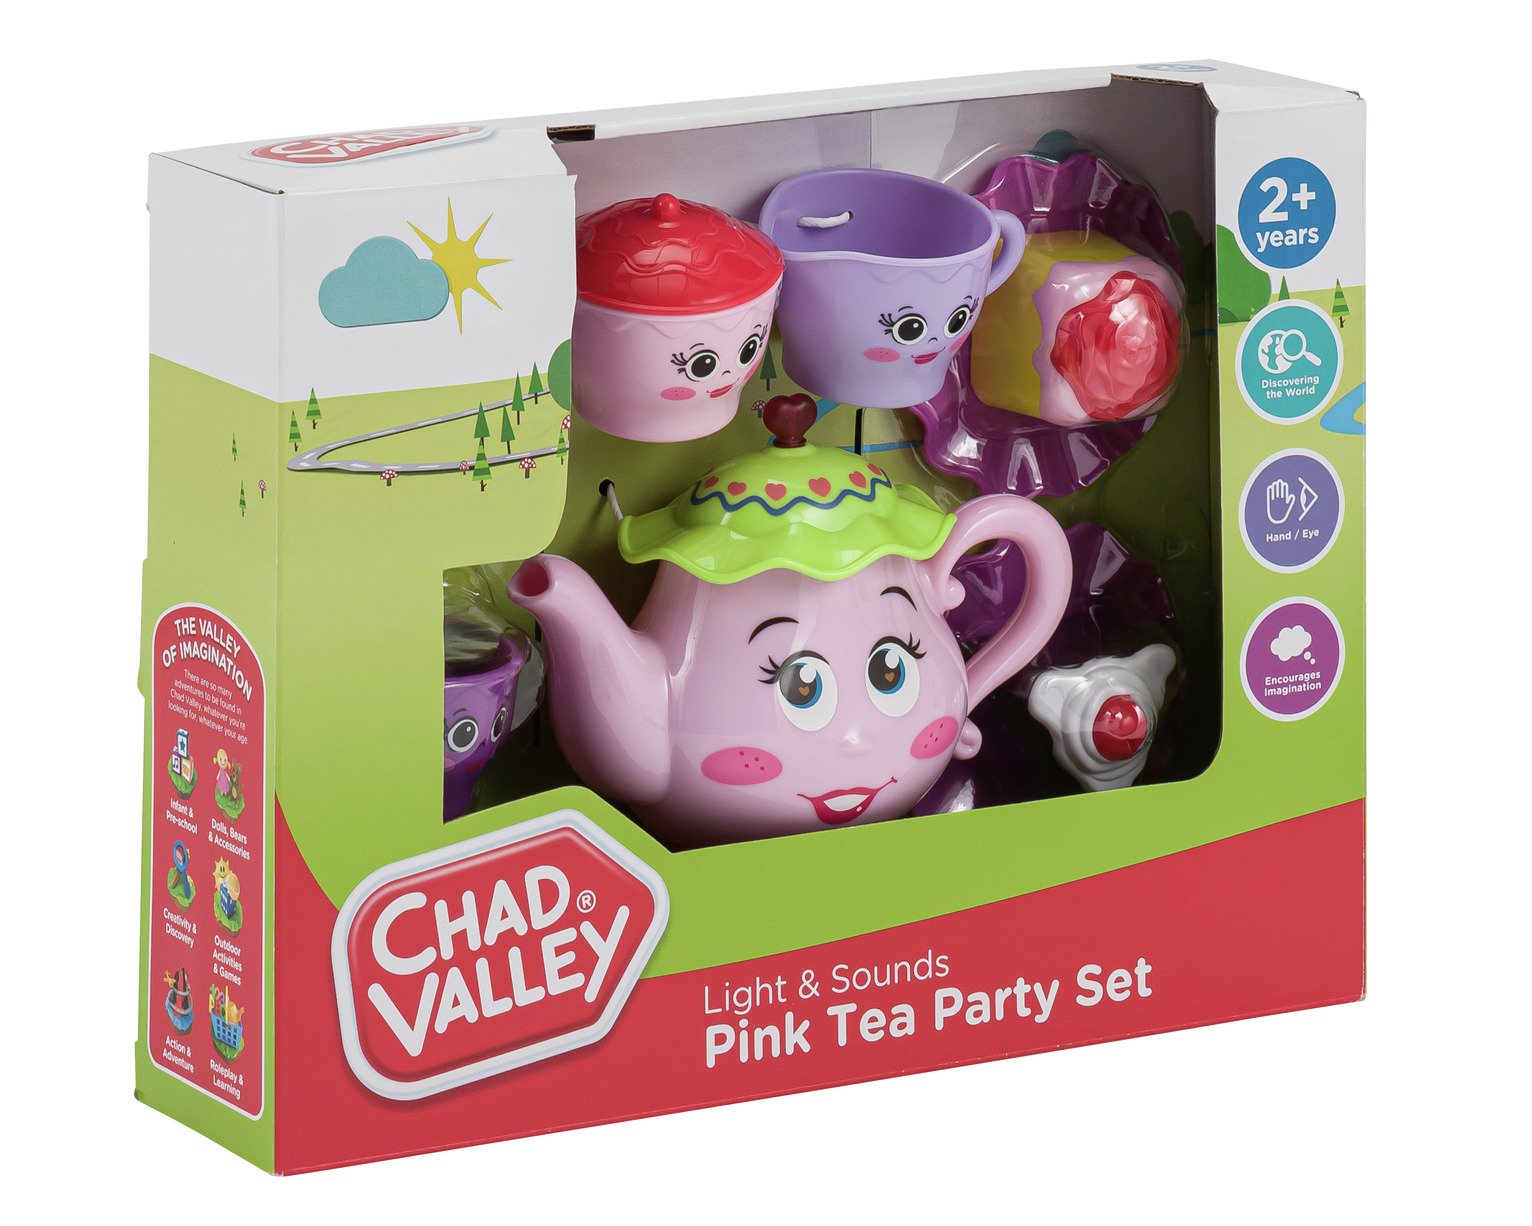 New Chad Valley Pink Tea Party Set With Sounds and Lights Includes 11 Pieces 